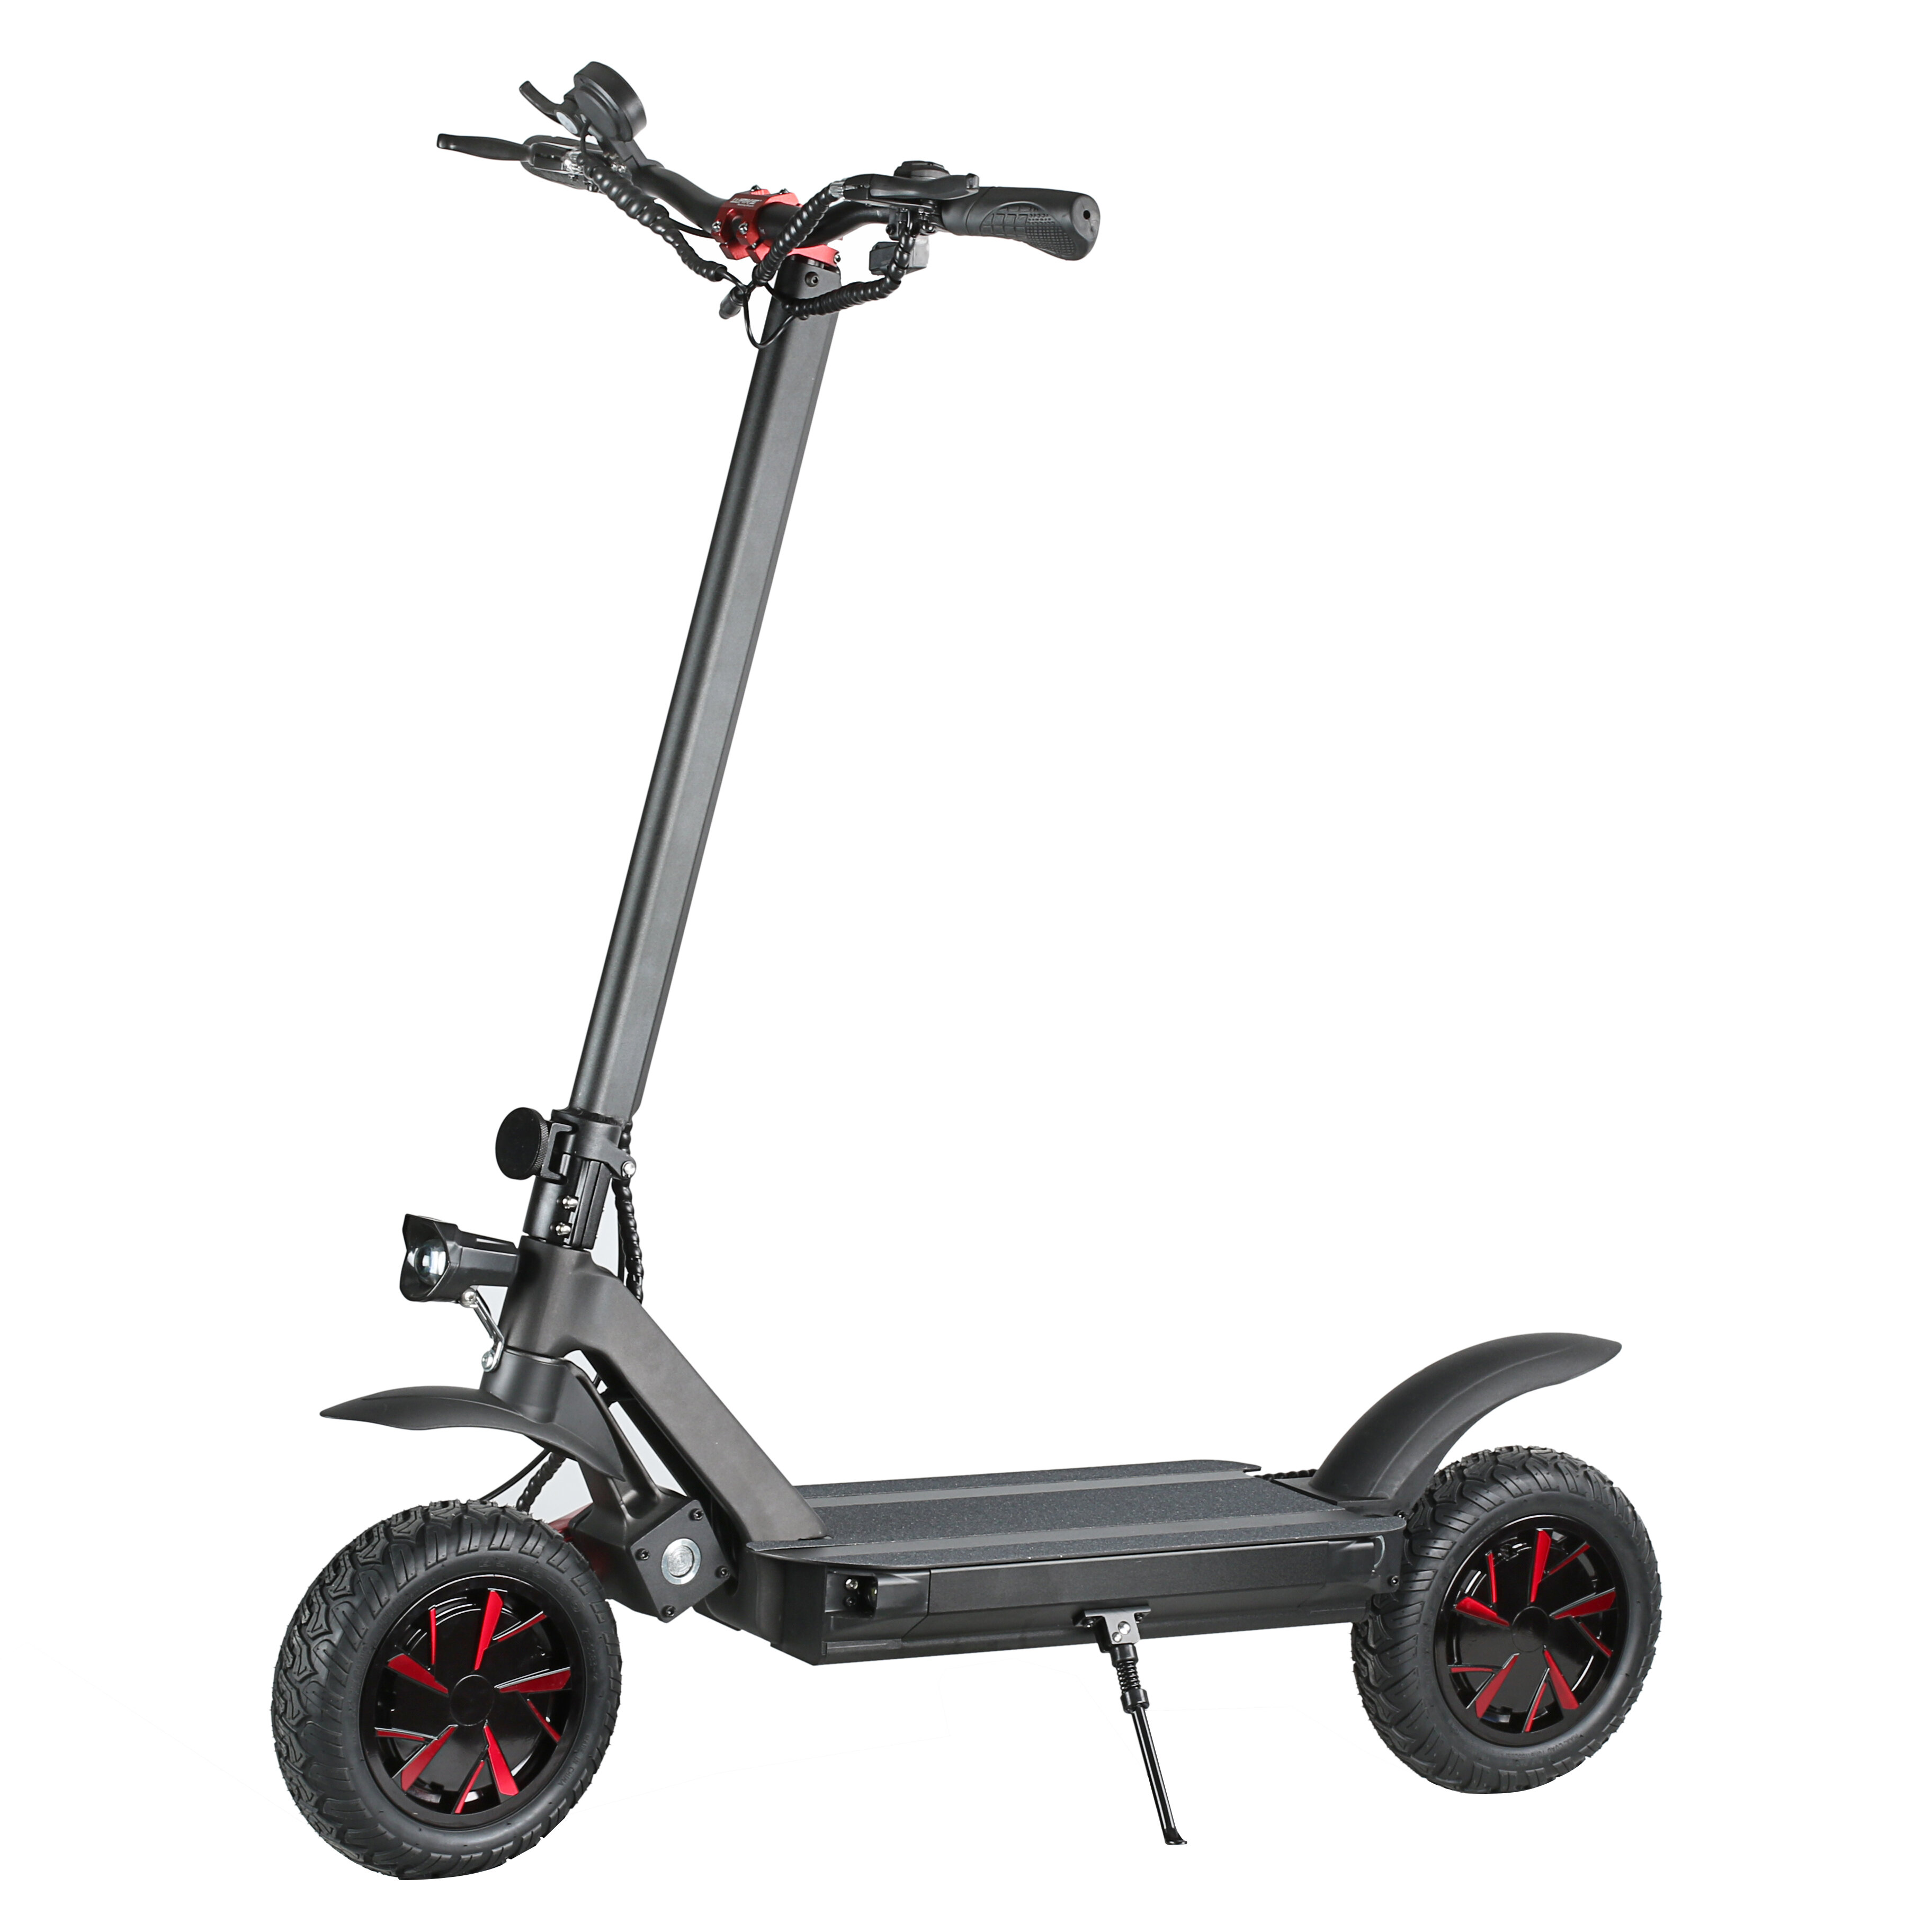 ESWING ESM8 60V 20.8Ah 3600W Dual Motor Folding Electric Scooter 70km/h Top Speed Max Load 150kg 11 inches Electric Scoo